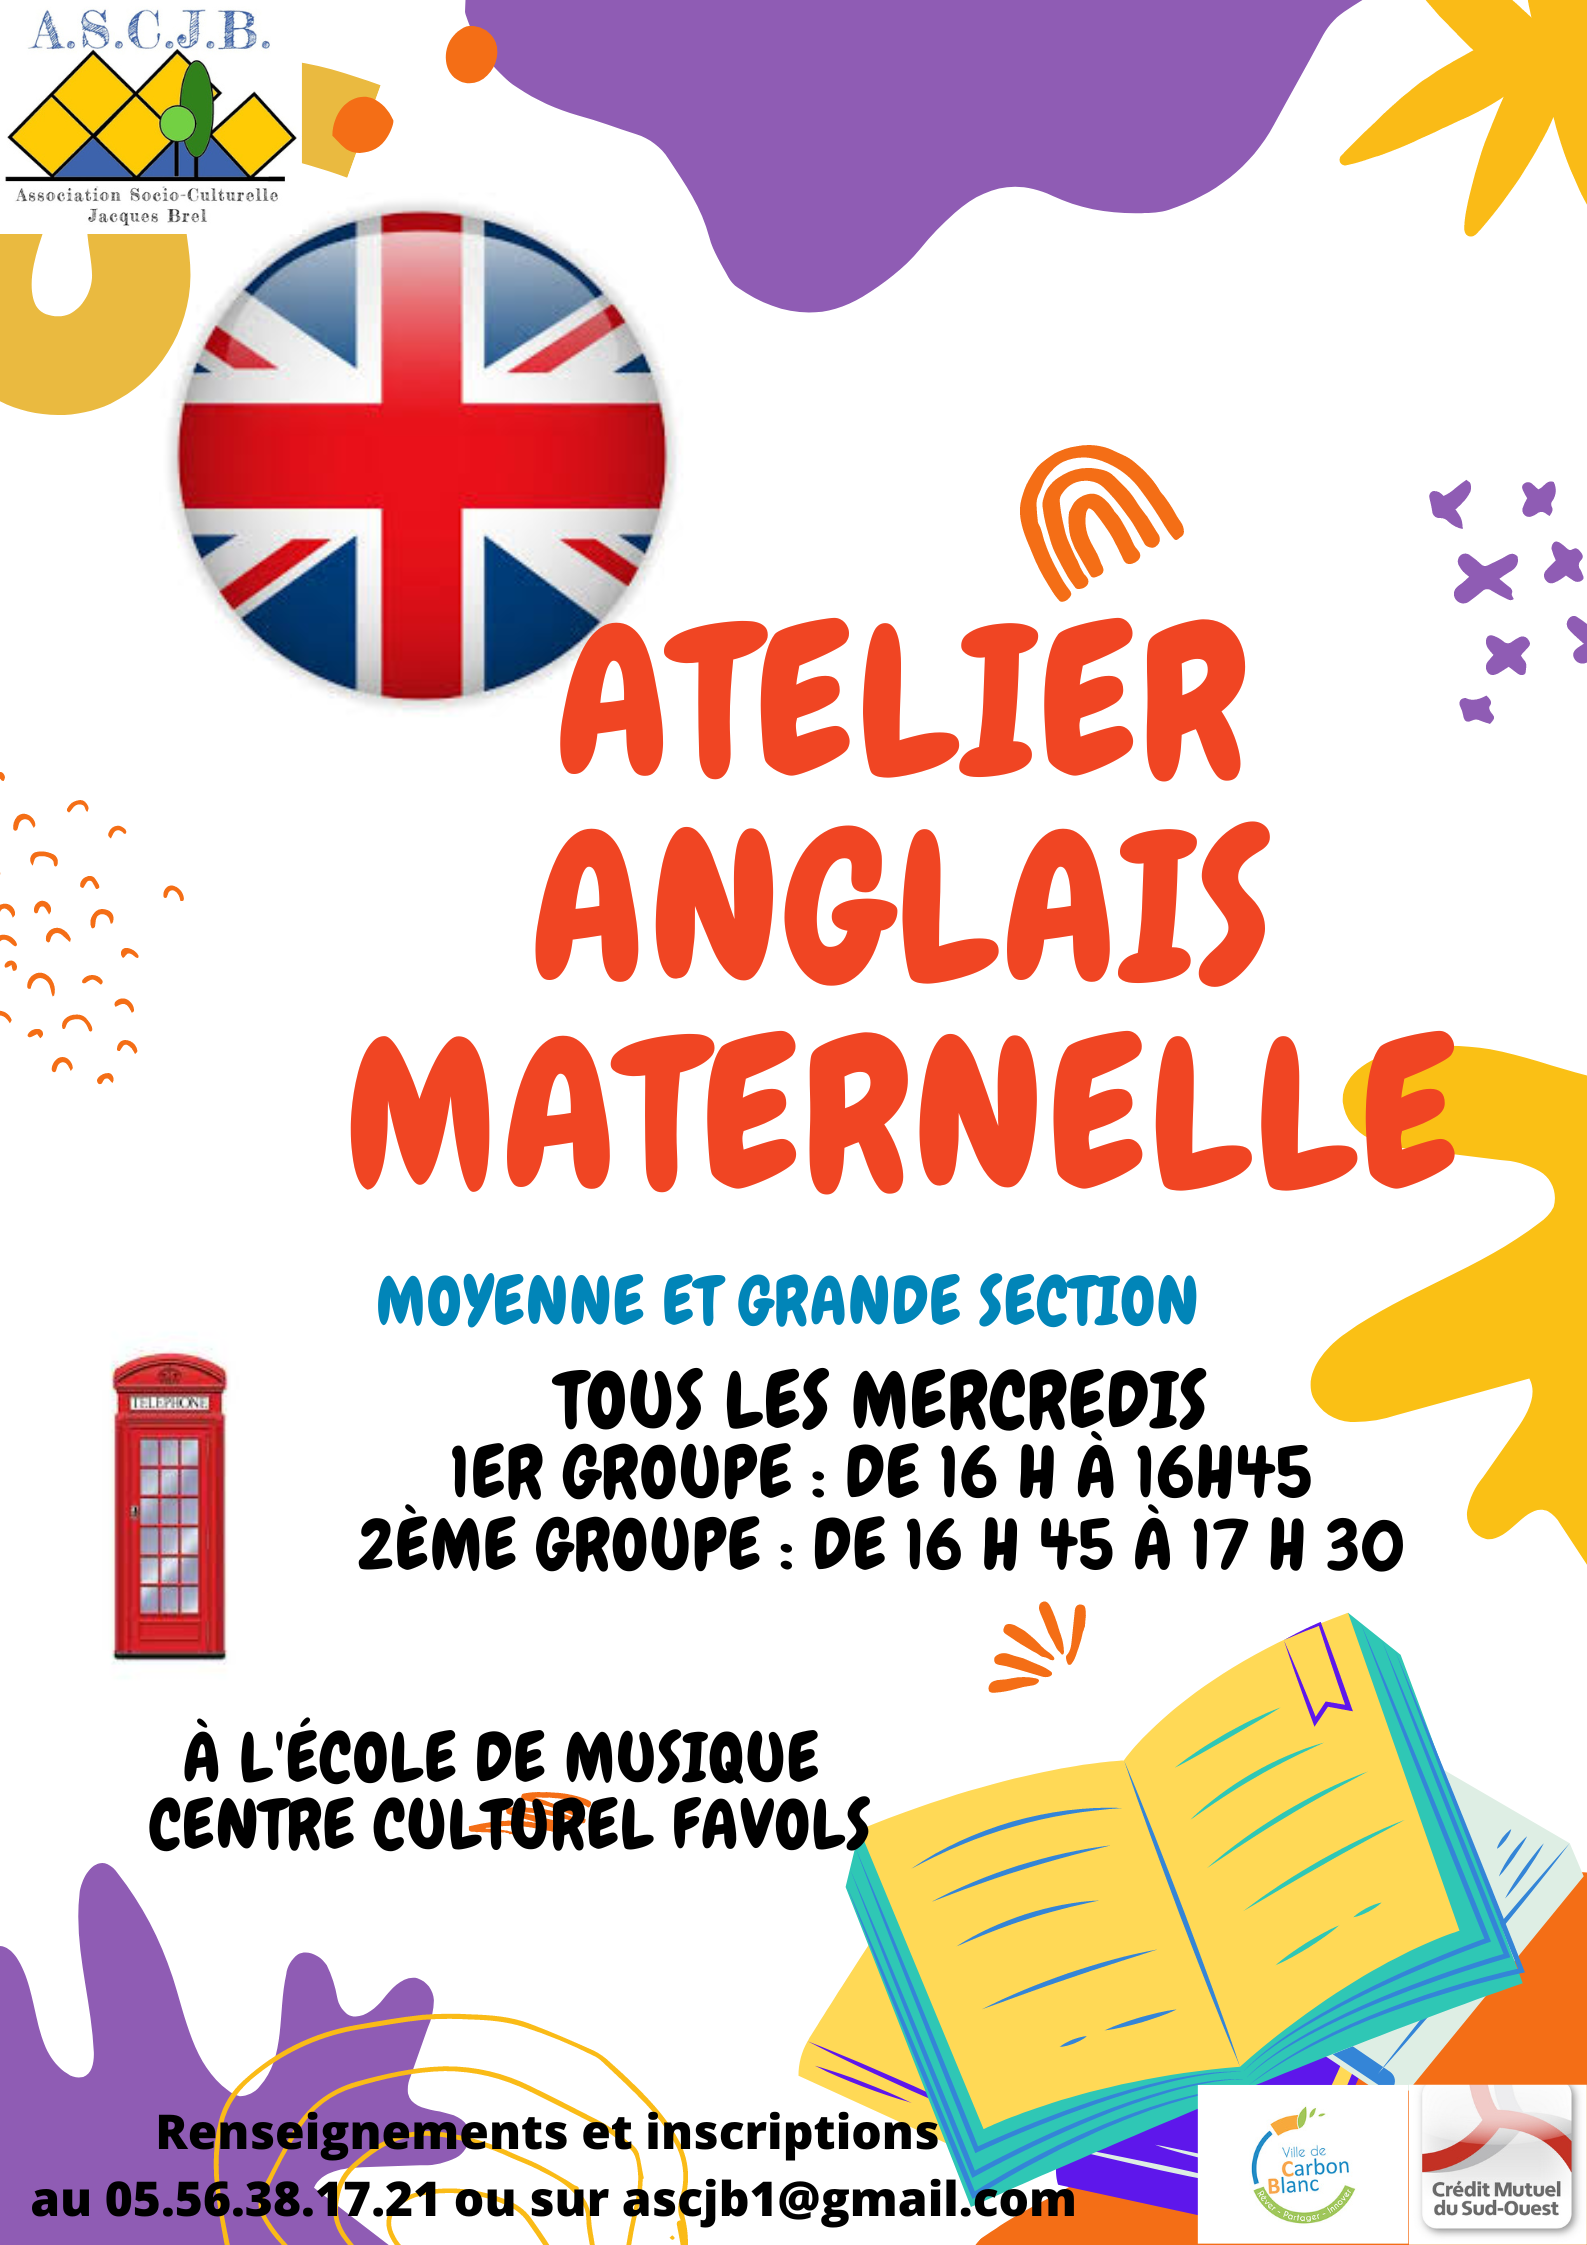 Atelier anglais maternelle 3 caf19